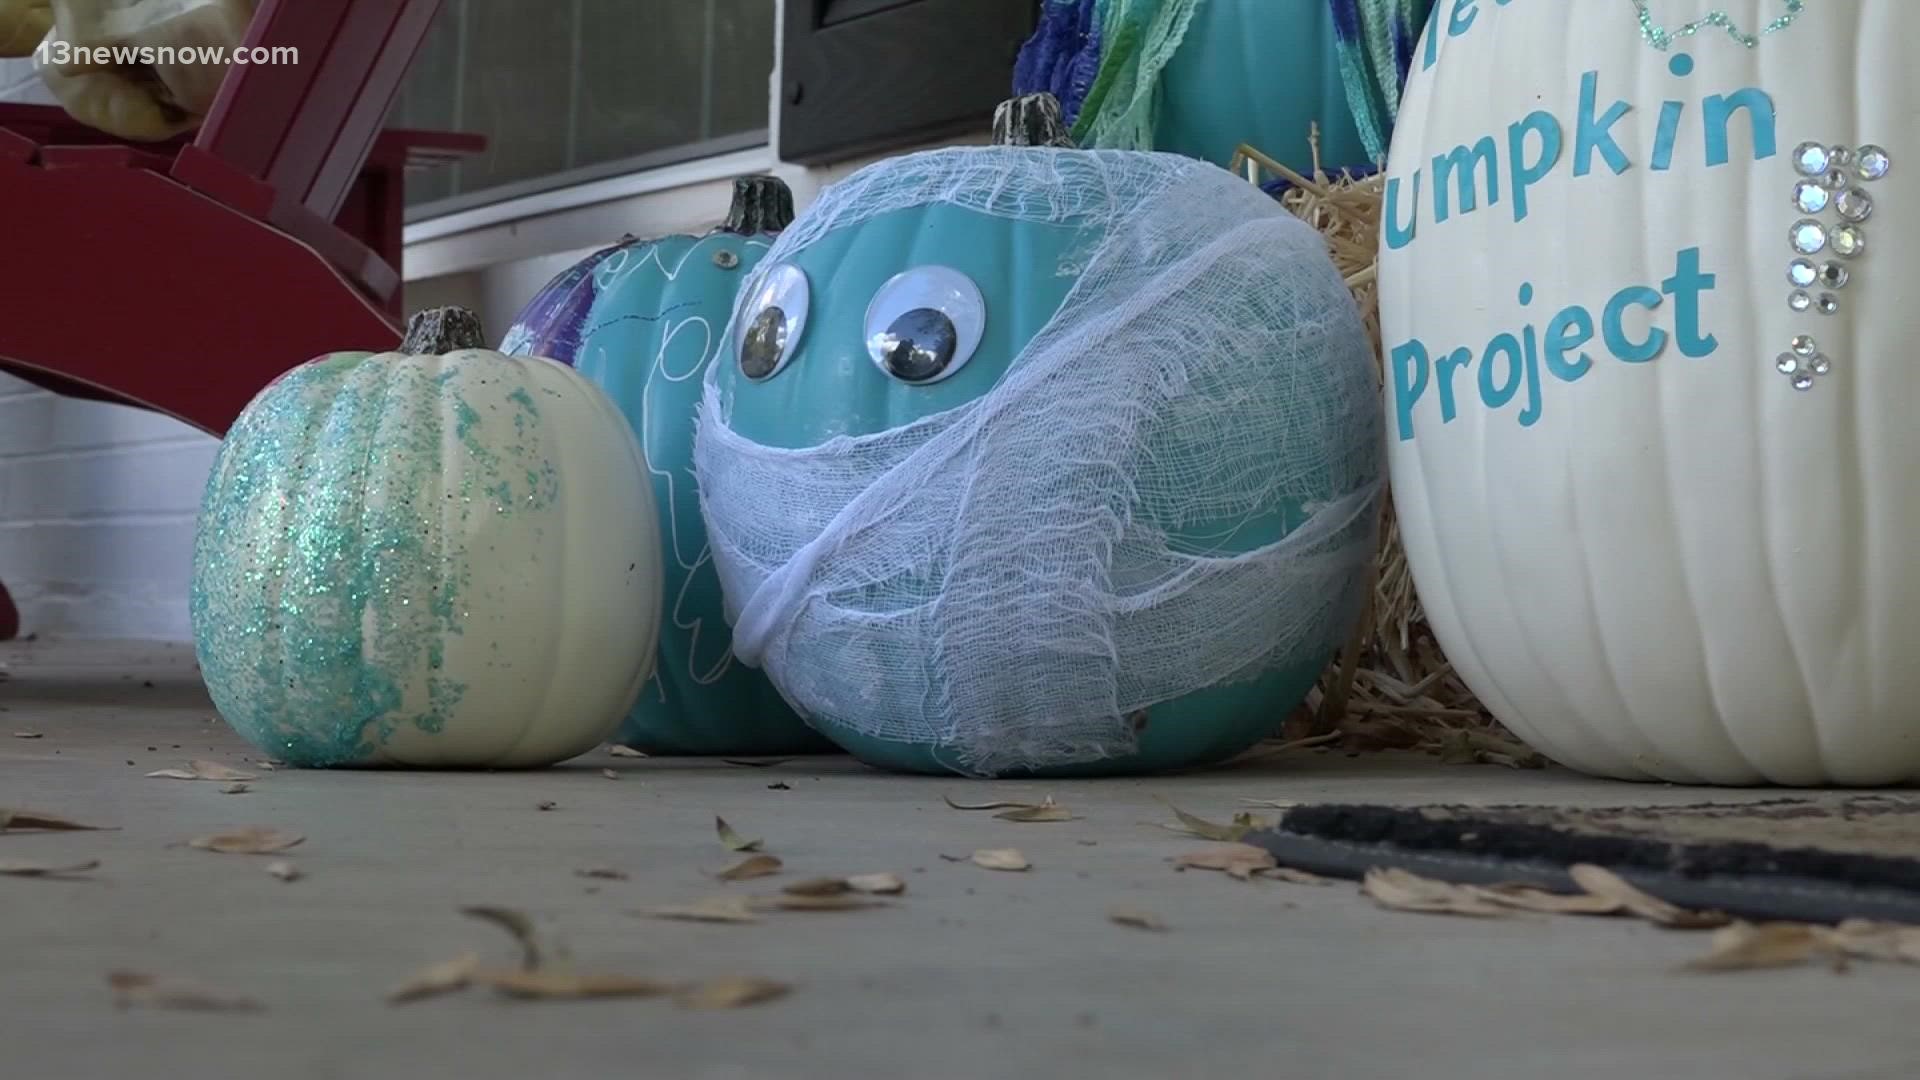 The Teal Pumpkin Project was created to allow kids with food allergies a chance to get other treats for Halloween that are safe -- outside of just candy.